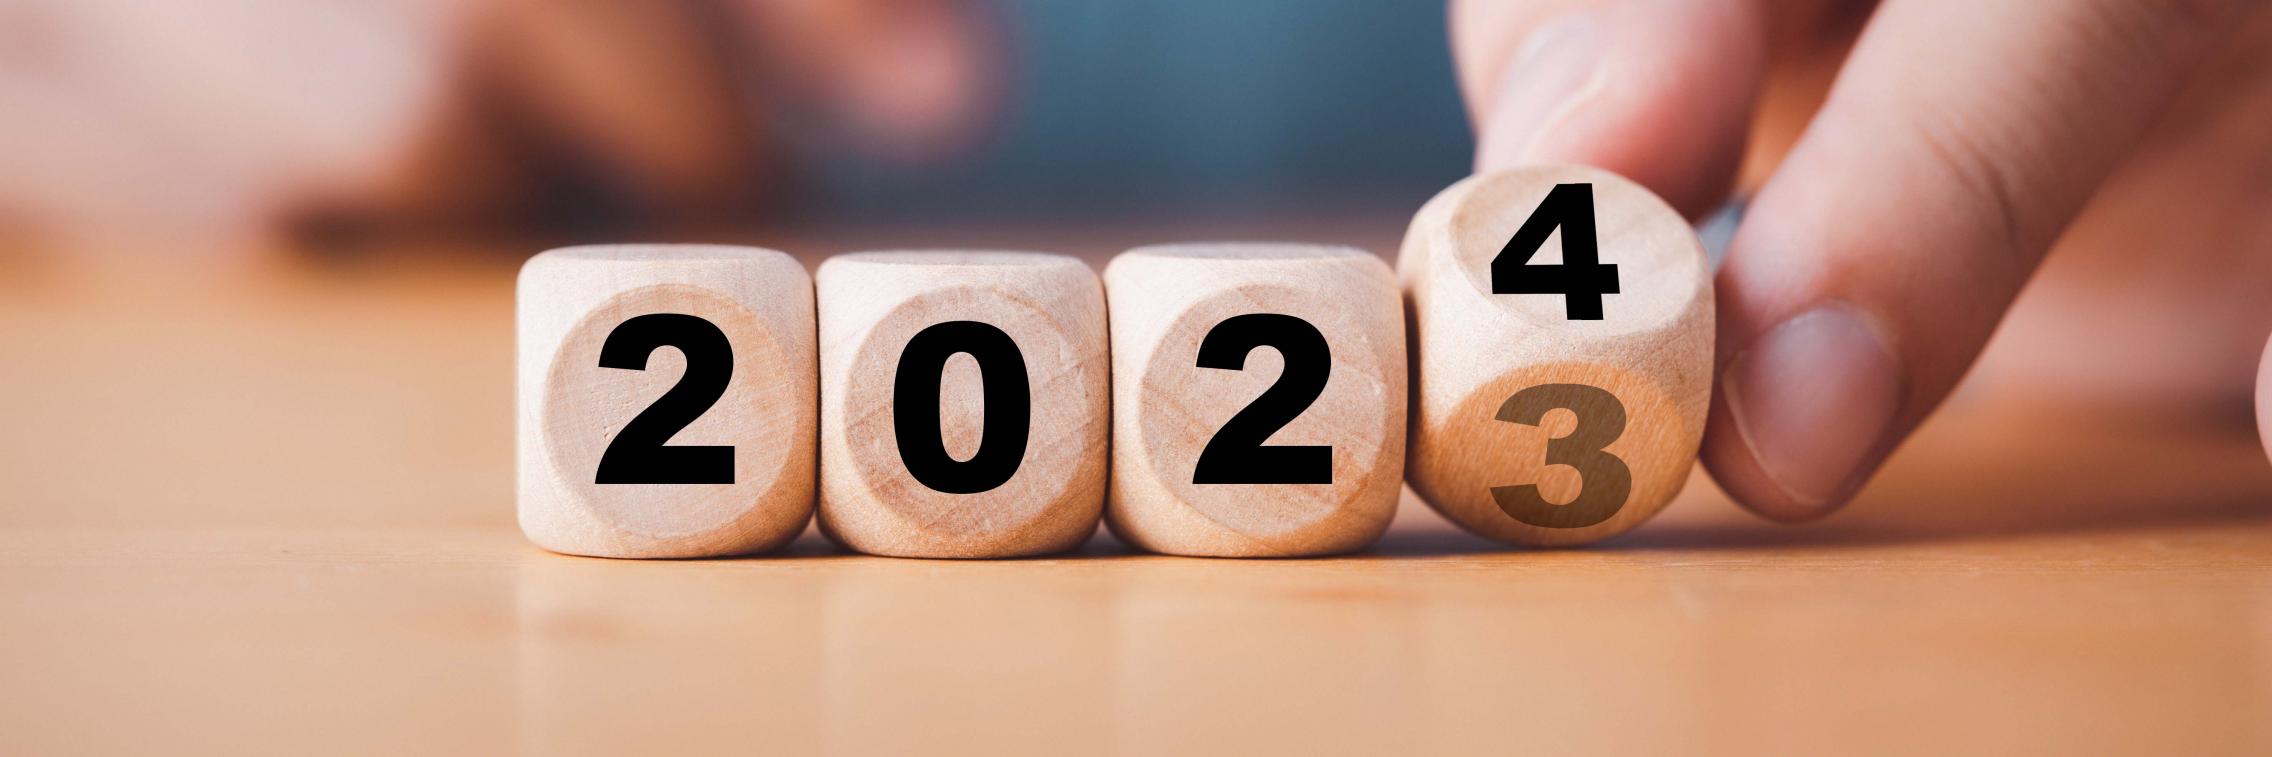 Four dice transforming from 2023 to 2024. 